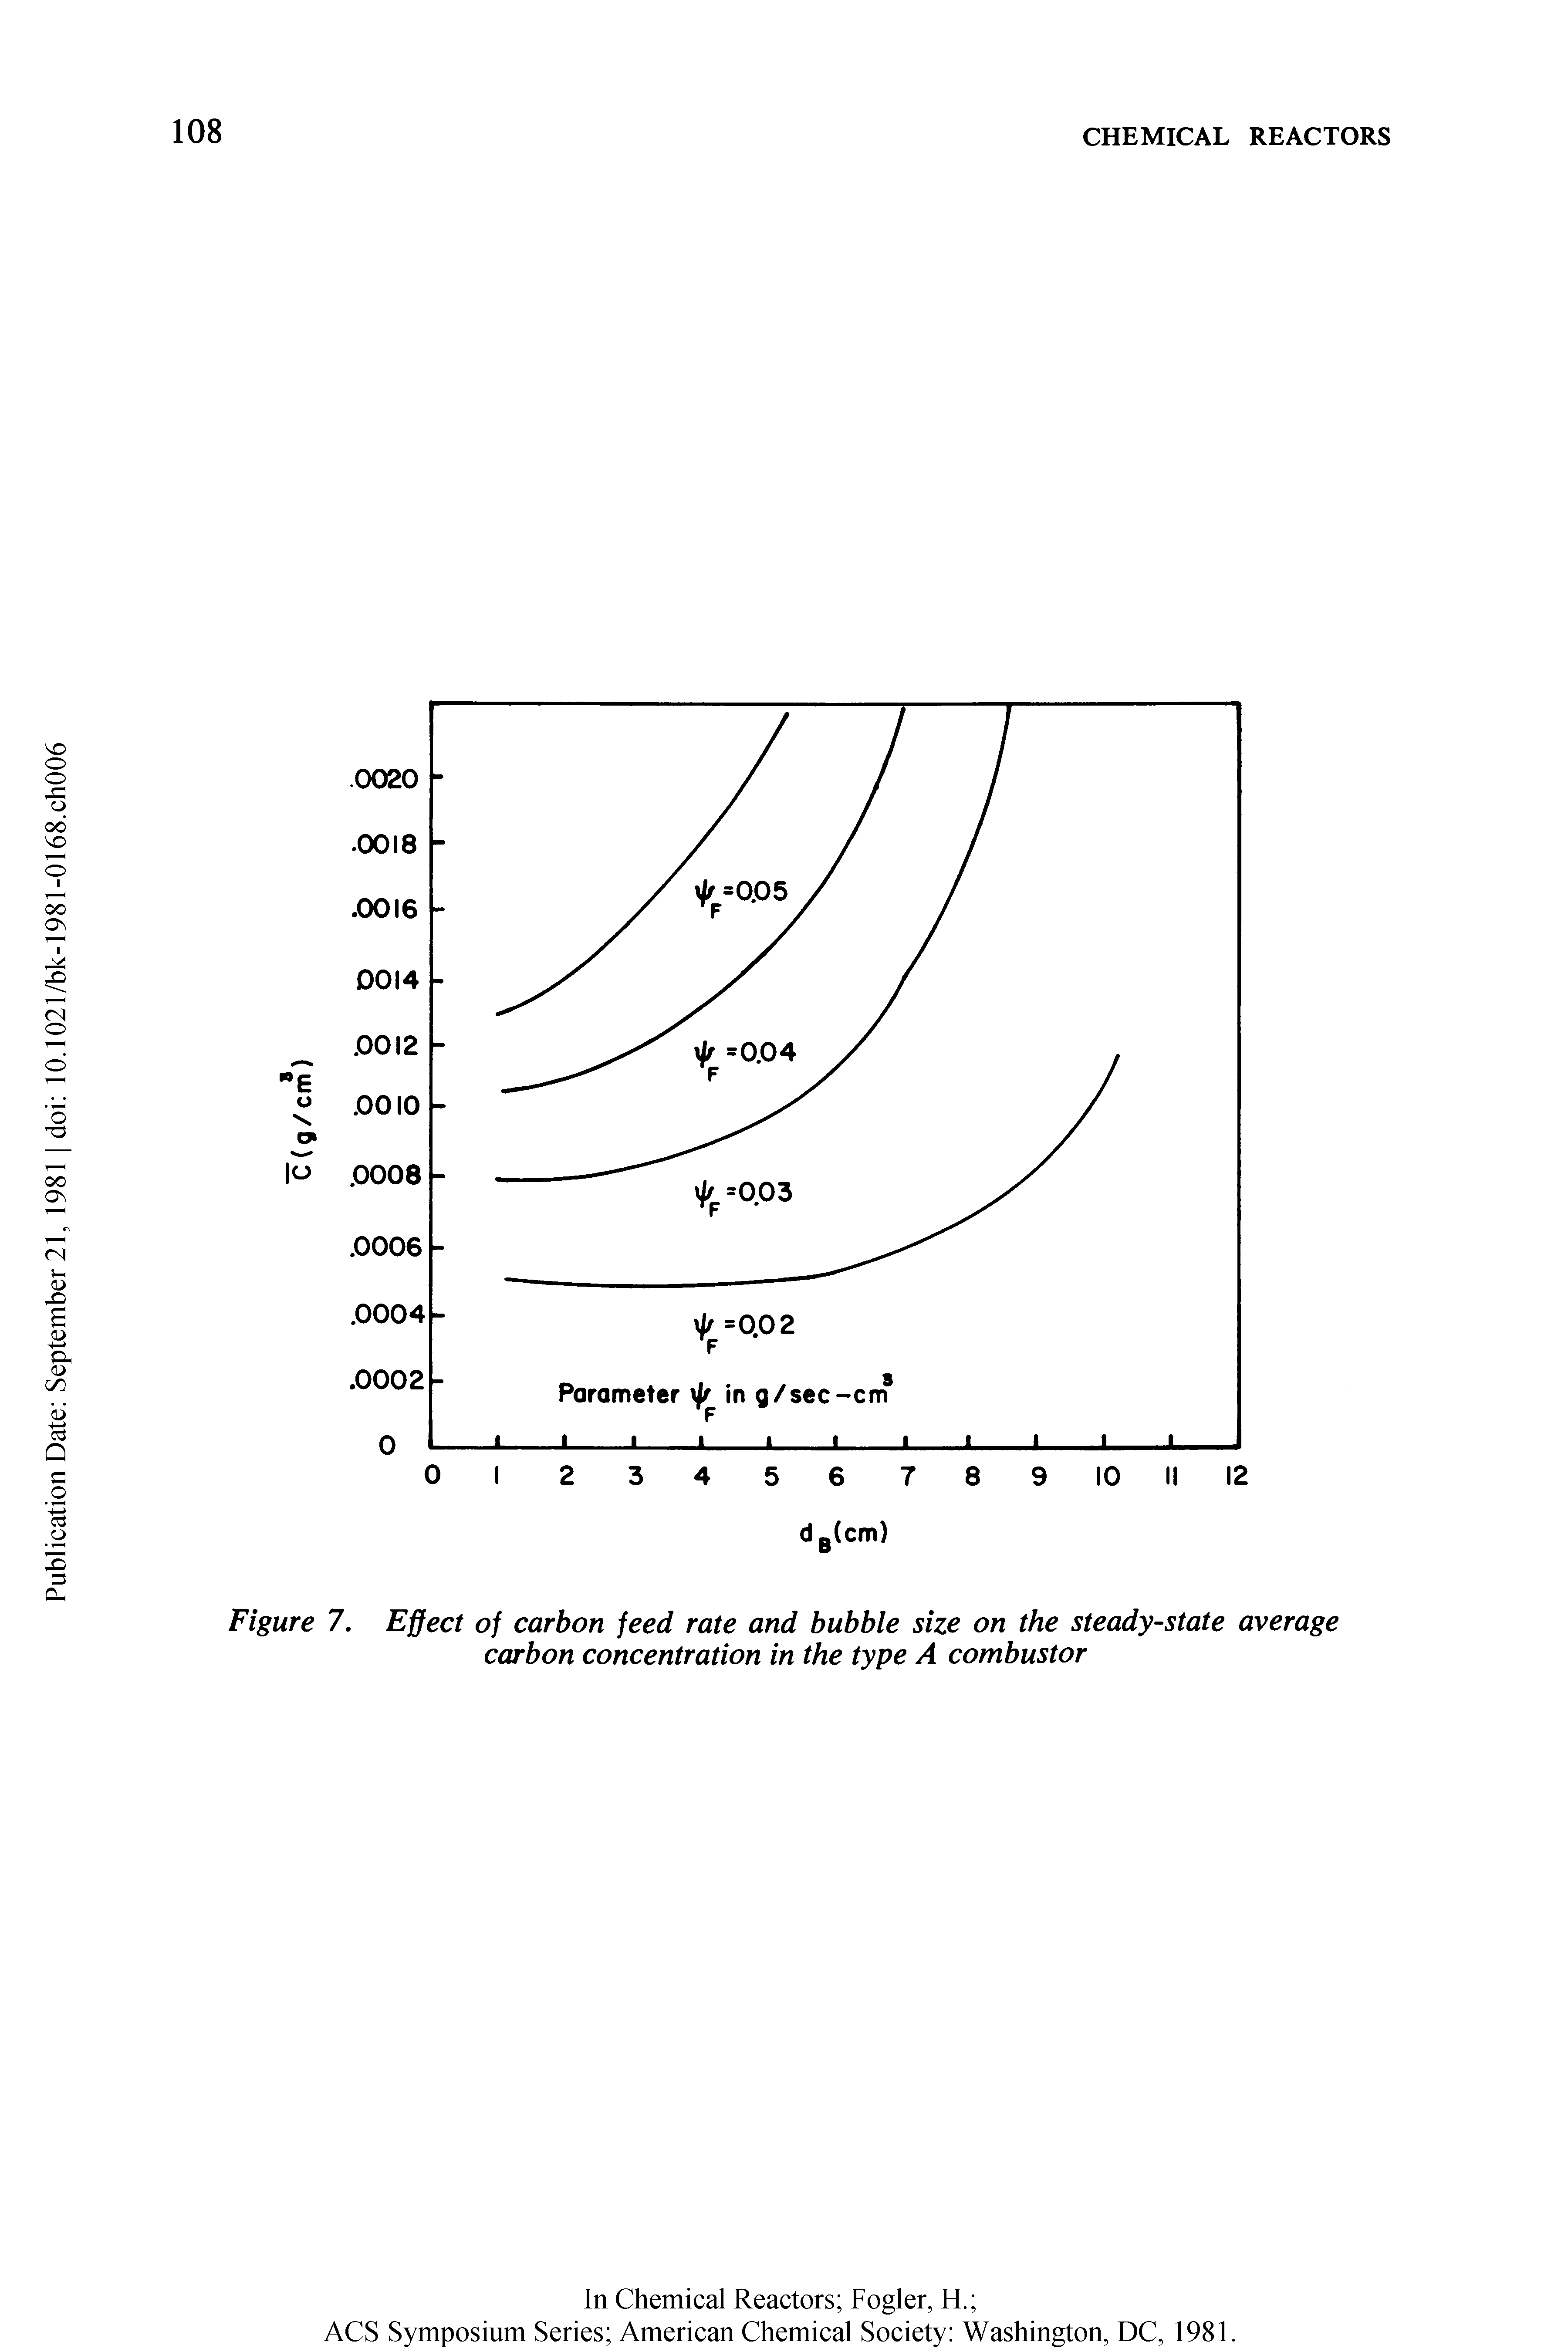 Figure 7. Effect of carbon feed rate and bubble size on the steady-state average carbon concentration in the type A combustor...